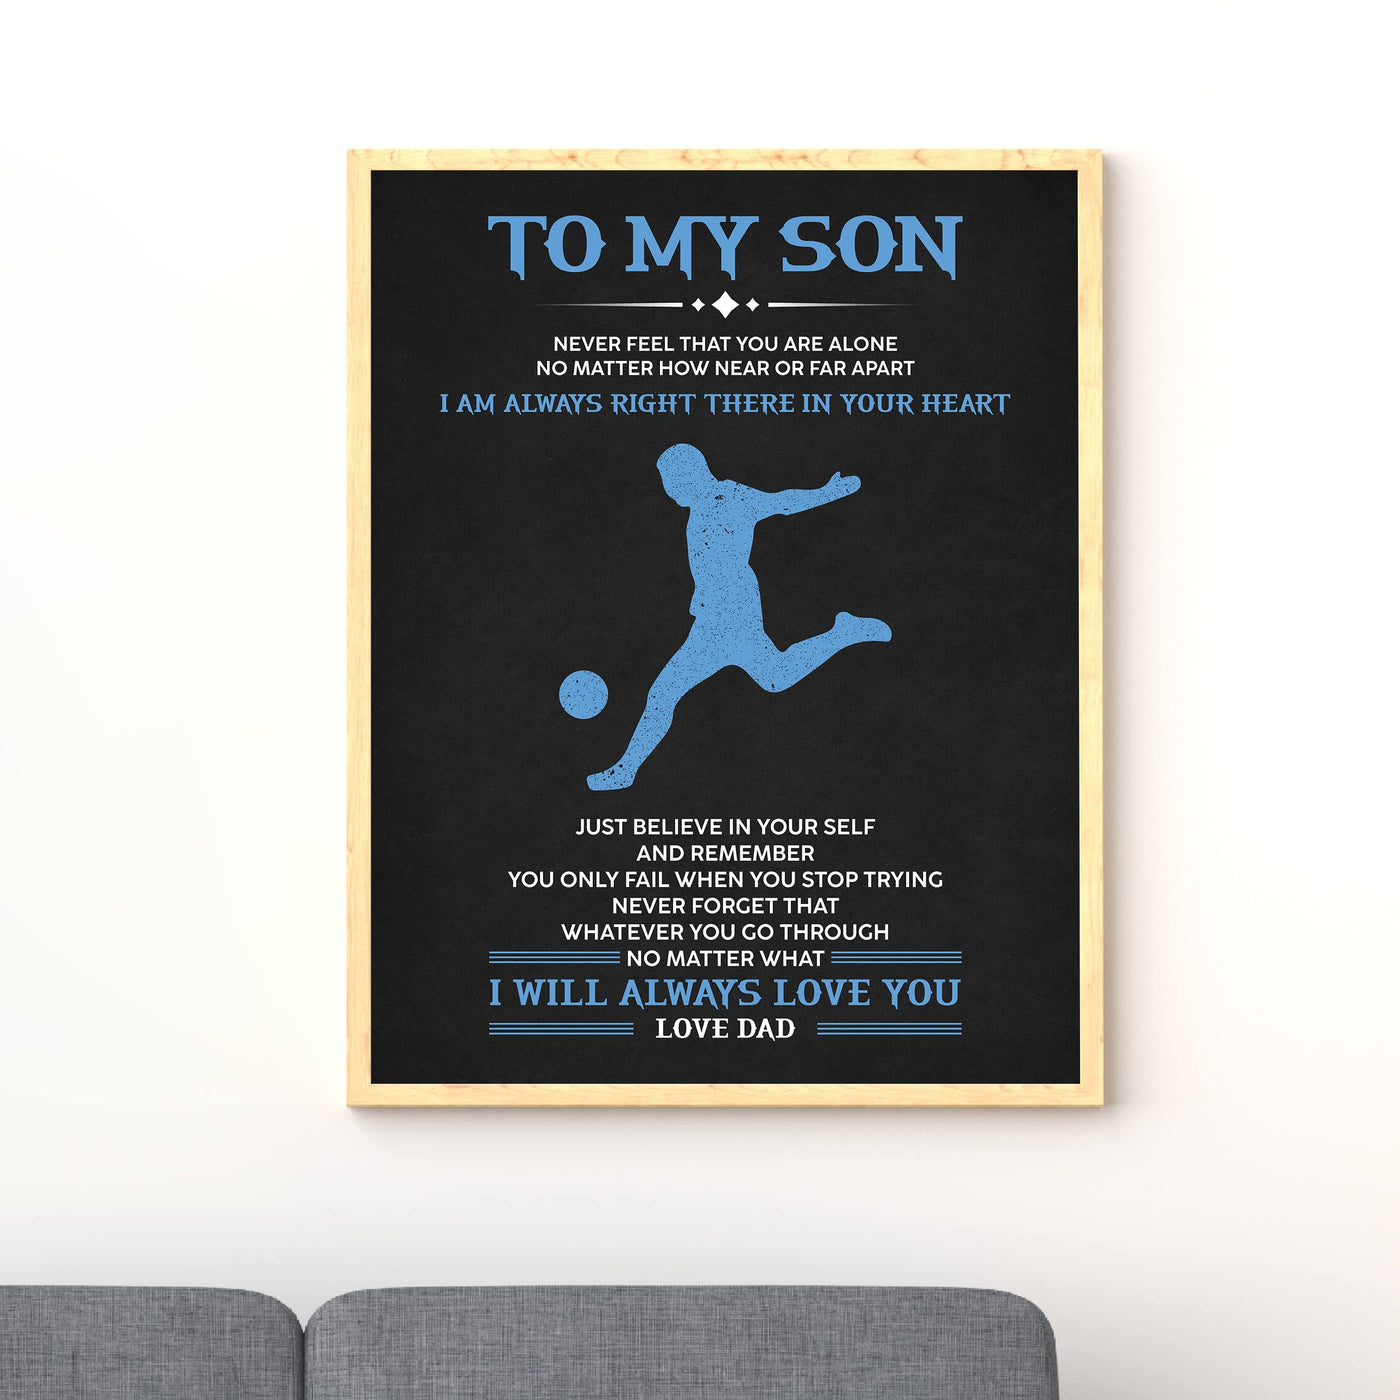 "To My Son -I'm Always There In Your Heart" Inspirational Family Wall Art Sign -11x14" Typographic Poster Print -Ready to Frame. Loving Message for Any Son. Great Keepsake Gift Love Dad!